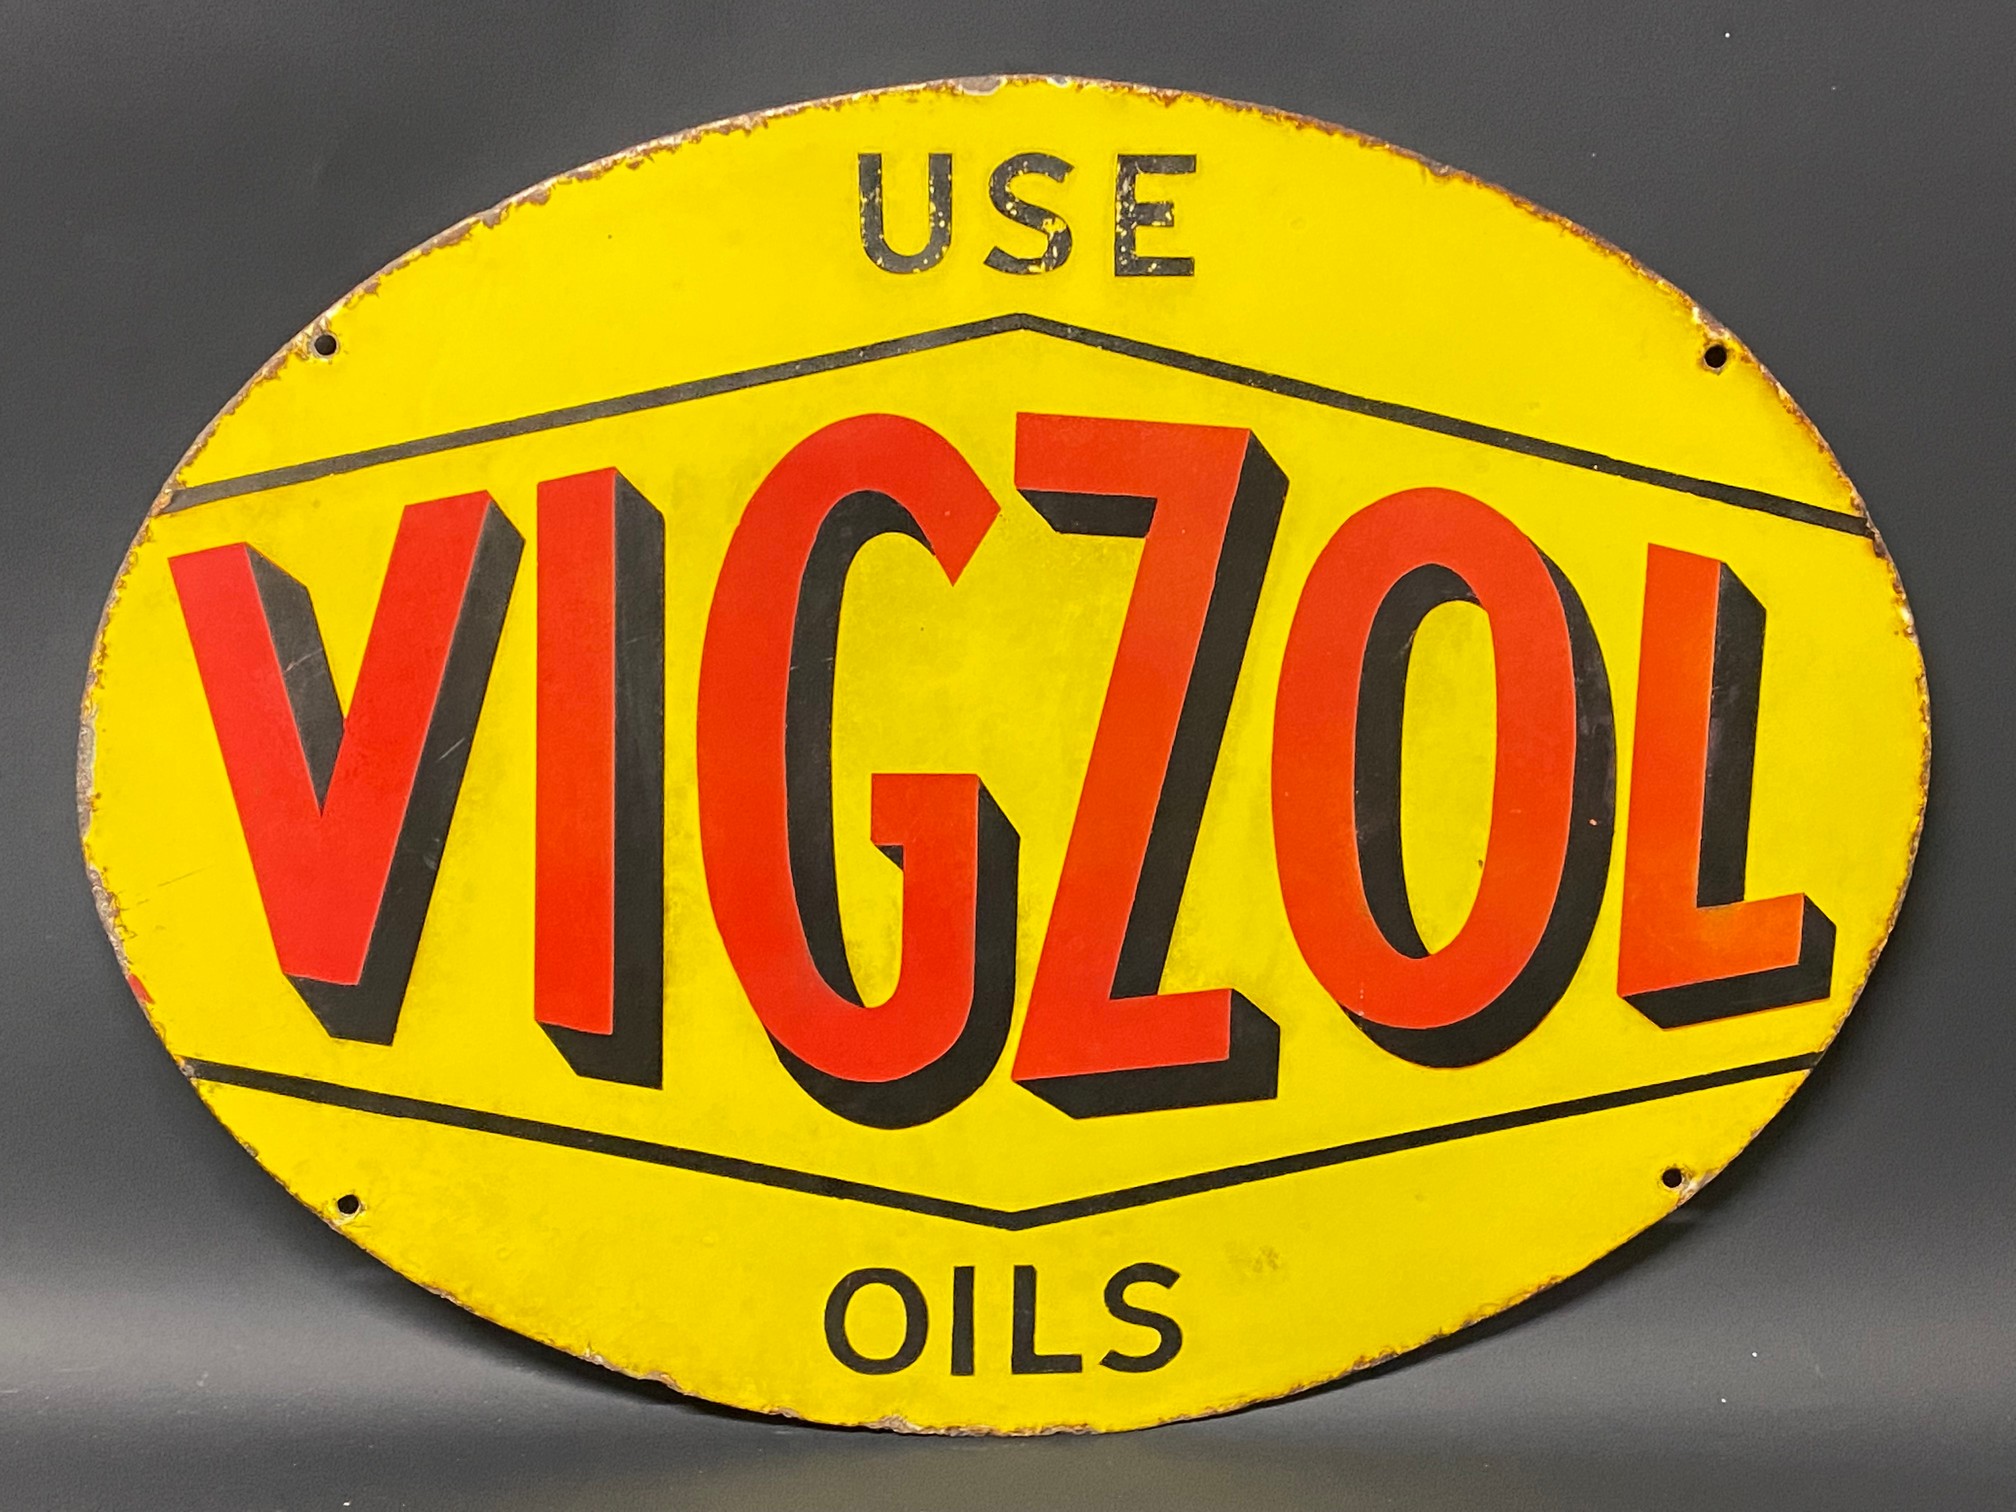 A Vigzol Oils oval double sided enamel sign in good condition, 24 x 18".